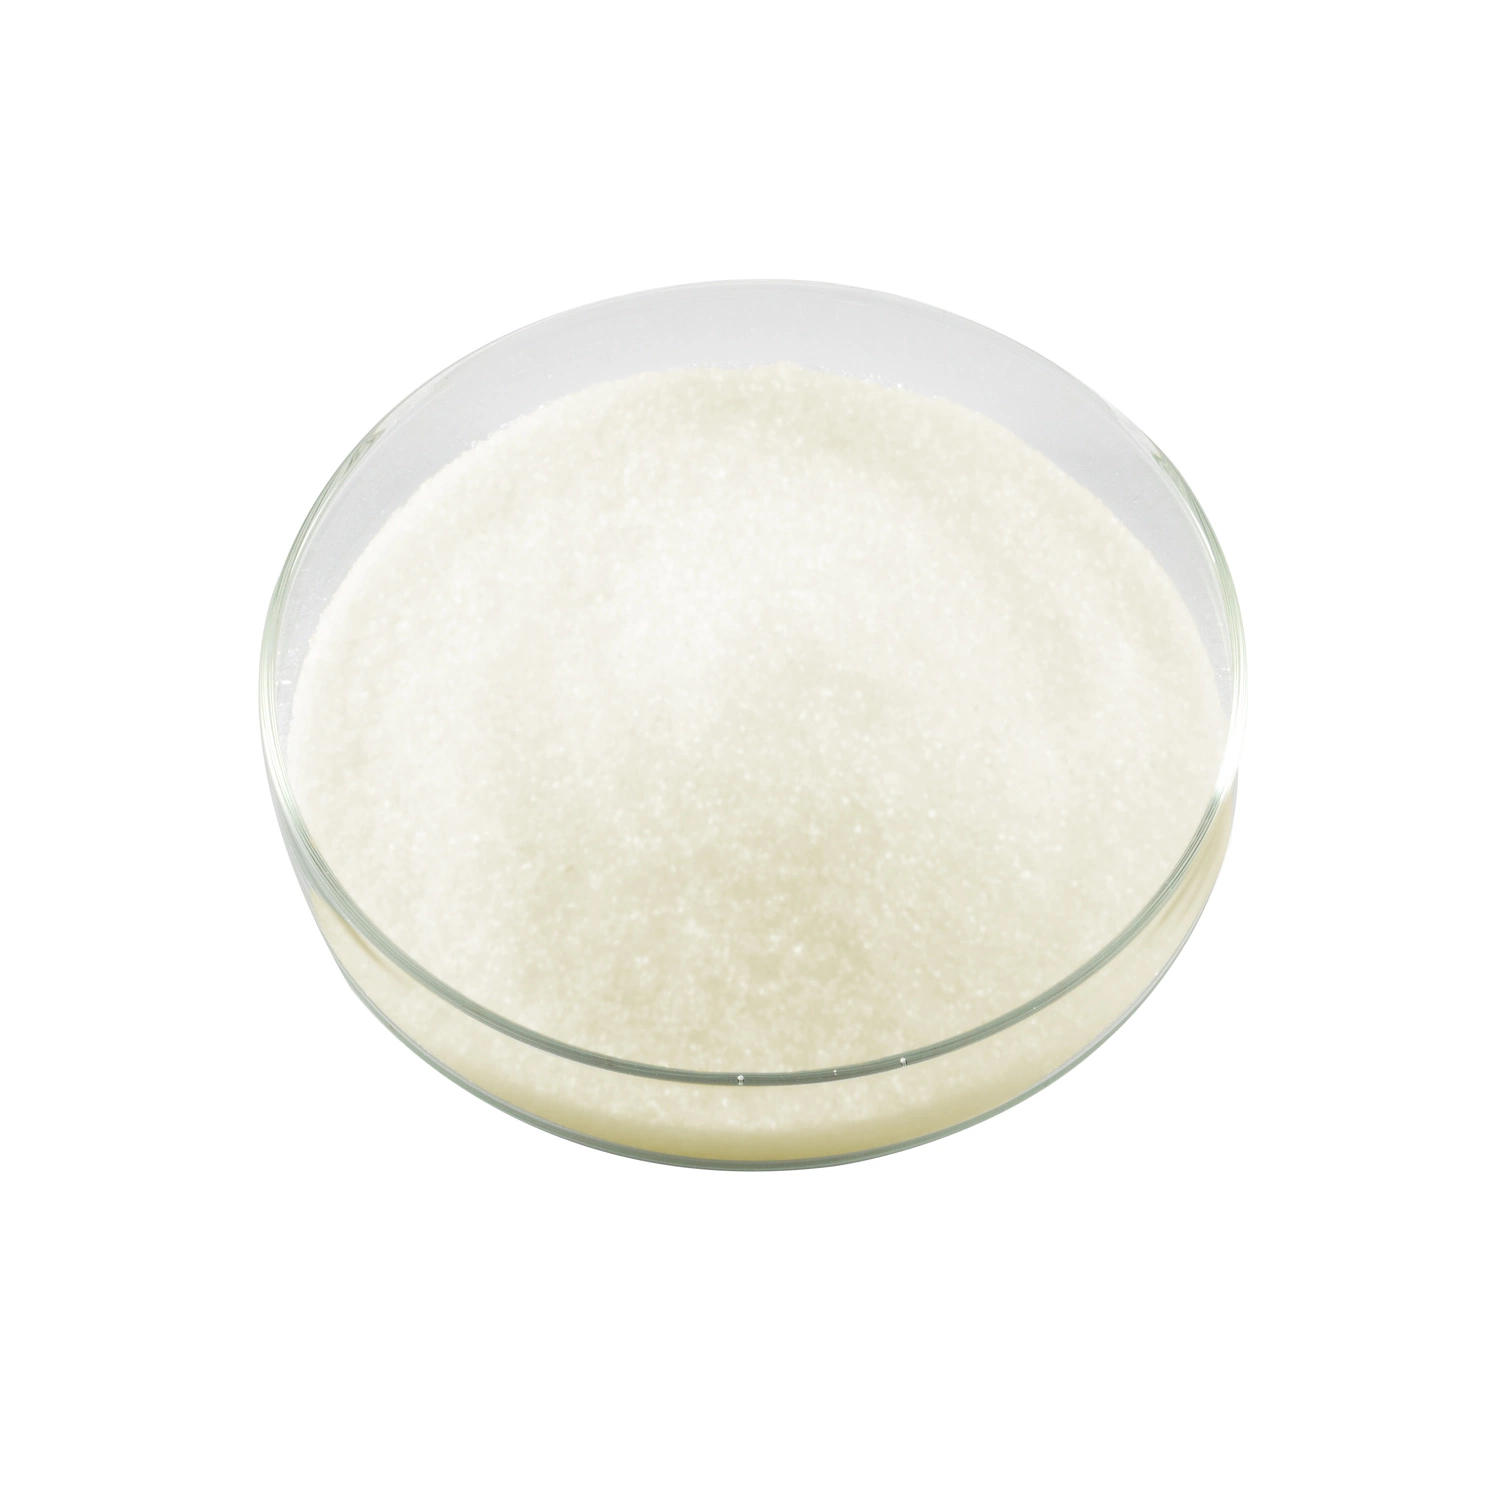 Food and Industrial-Grade Xanthan Gum for Various Applications